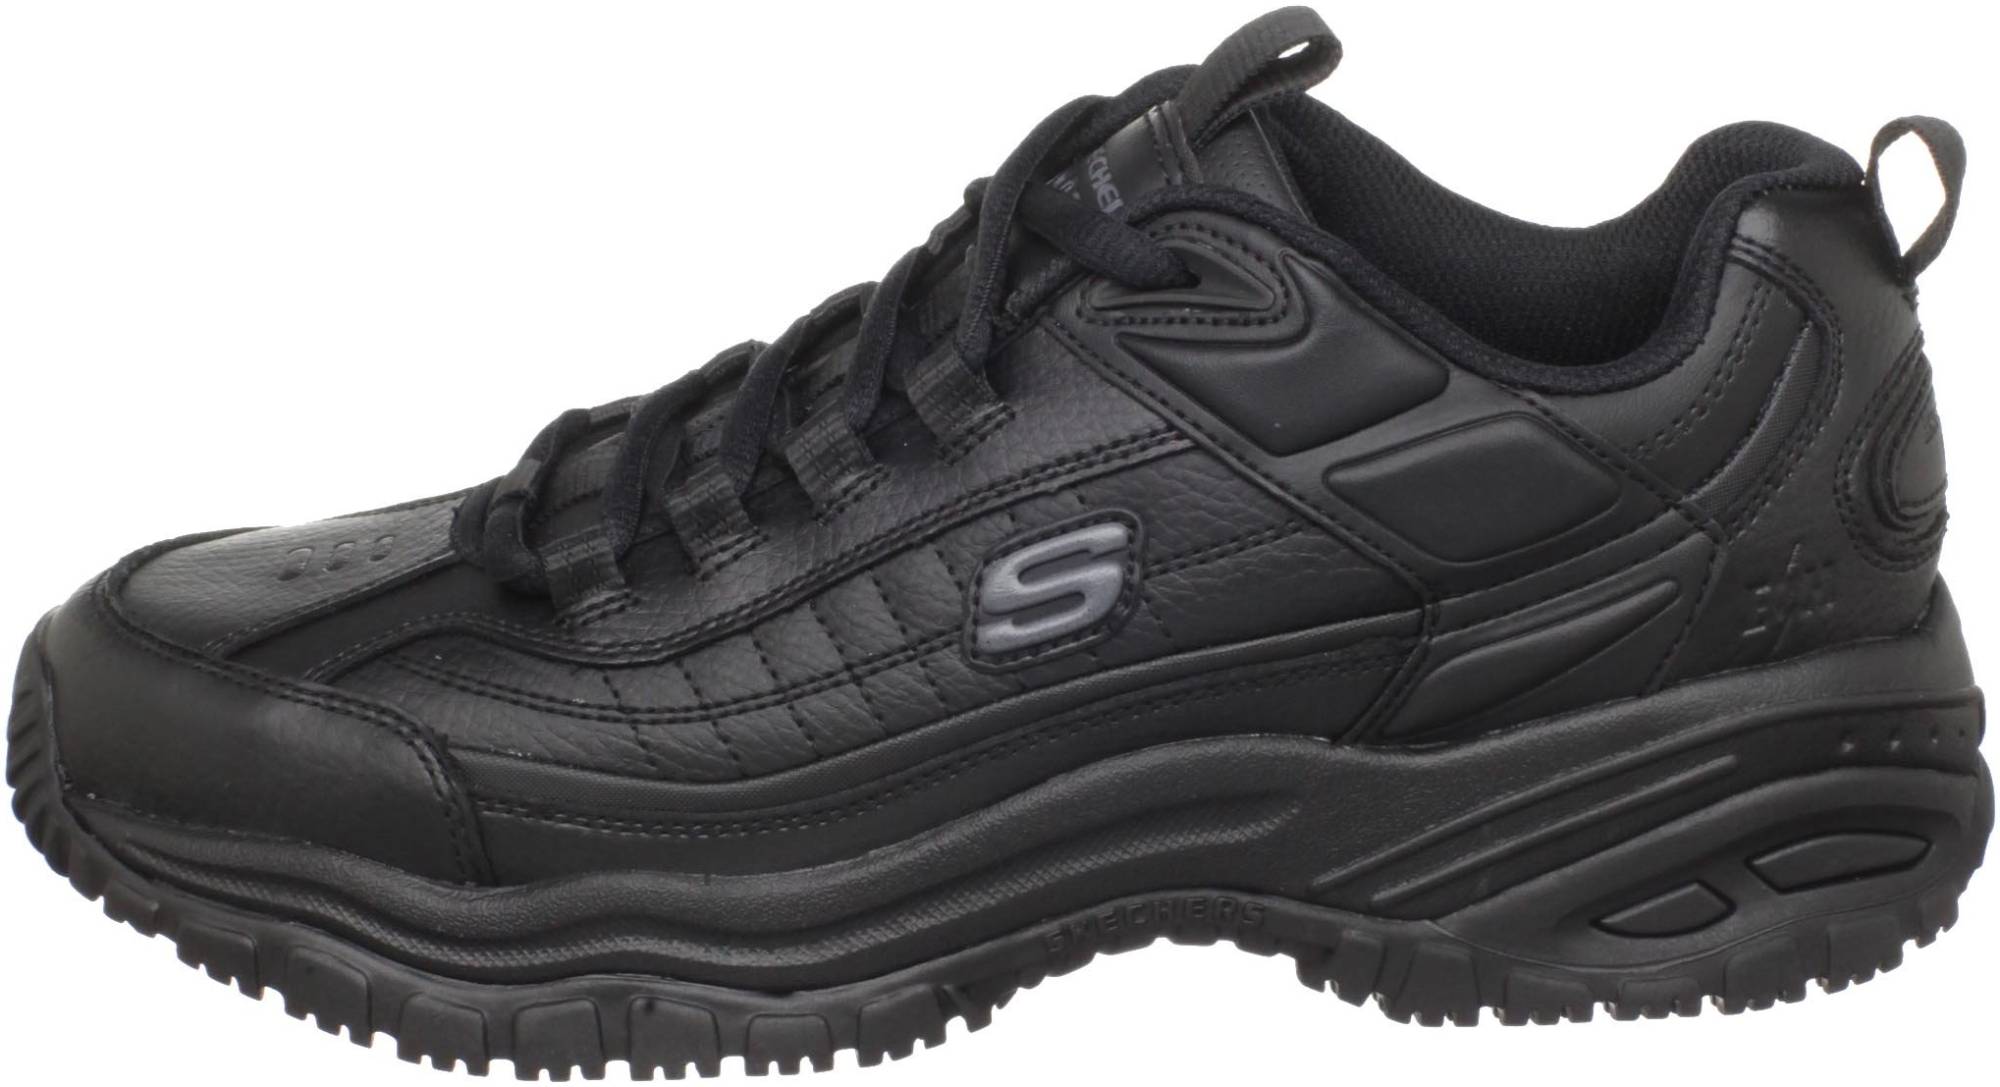 Skechers Work: Soft Stride - Galley Review 2023, Facts, Deals | RunRepeat